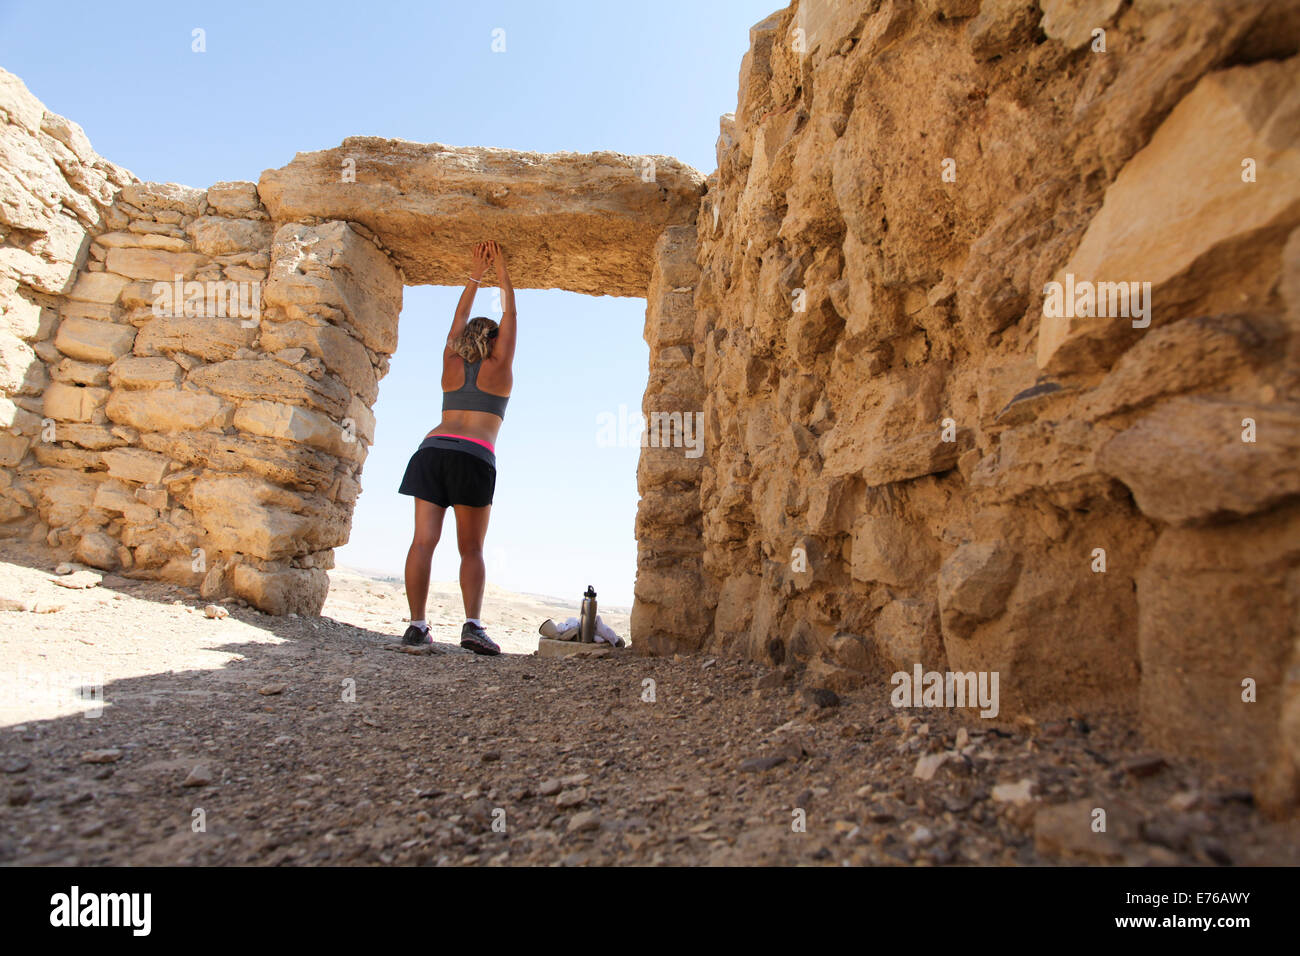 Woman worksout in ancient ruins in the desert Stock Photo